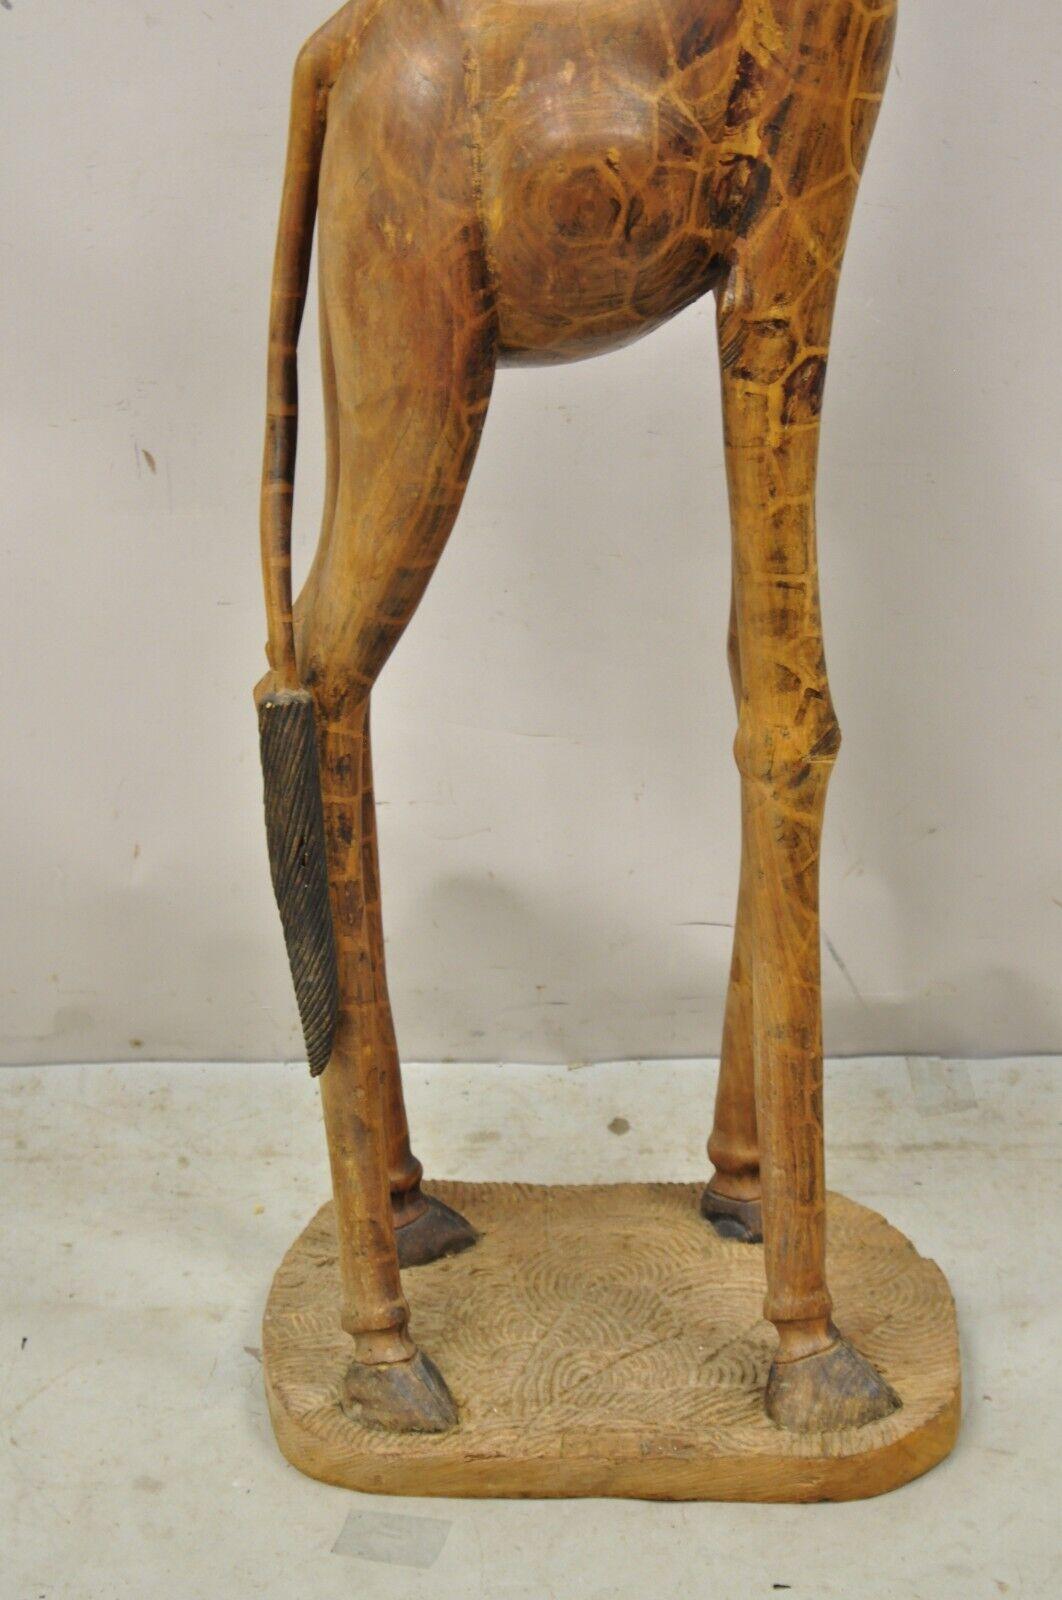 Primitive Vintage Solid Carved Wood 72” Tall African Safari Giraffe Statue Sculpture For Sale